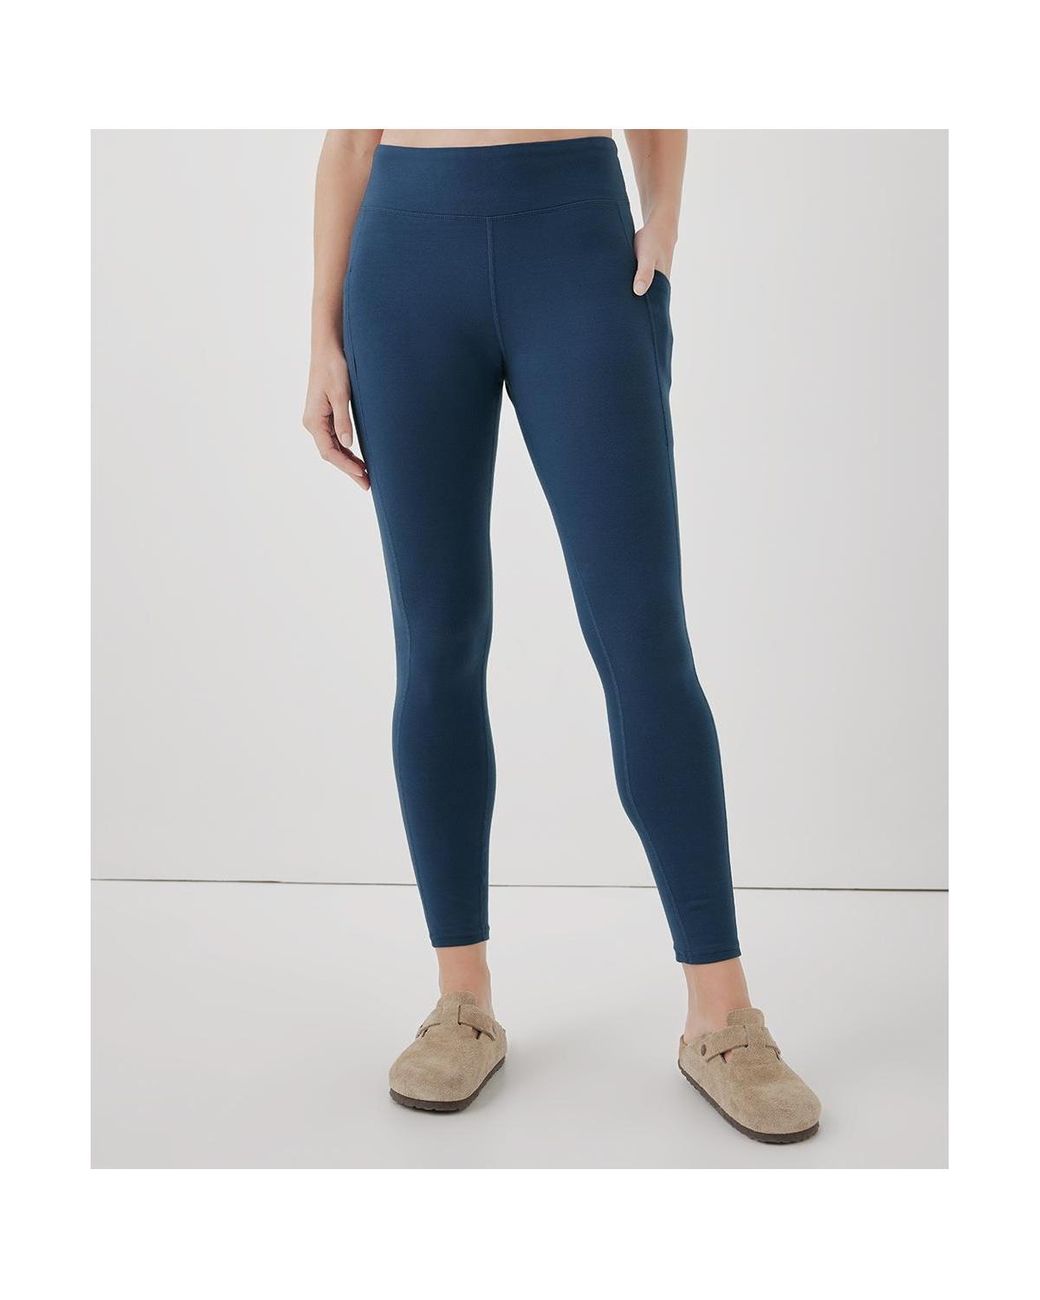 Pact Purefit Pocket legging Made With Cotton in Blue